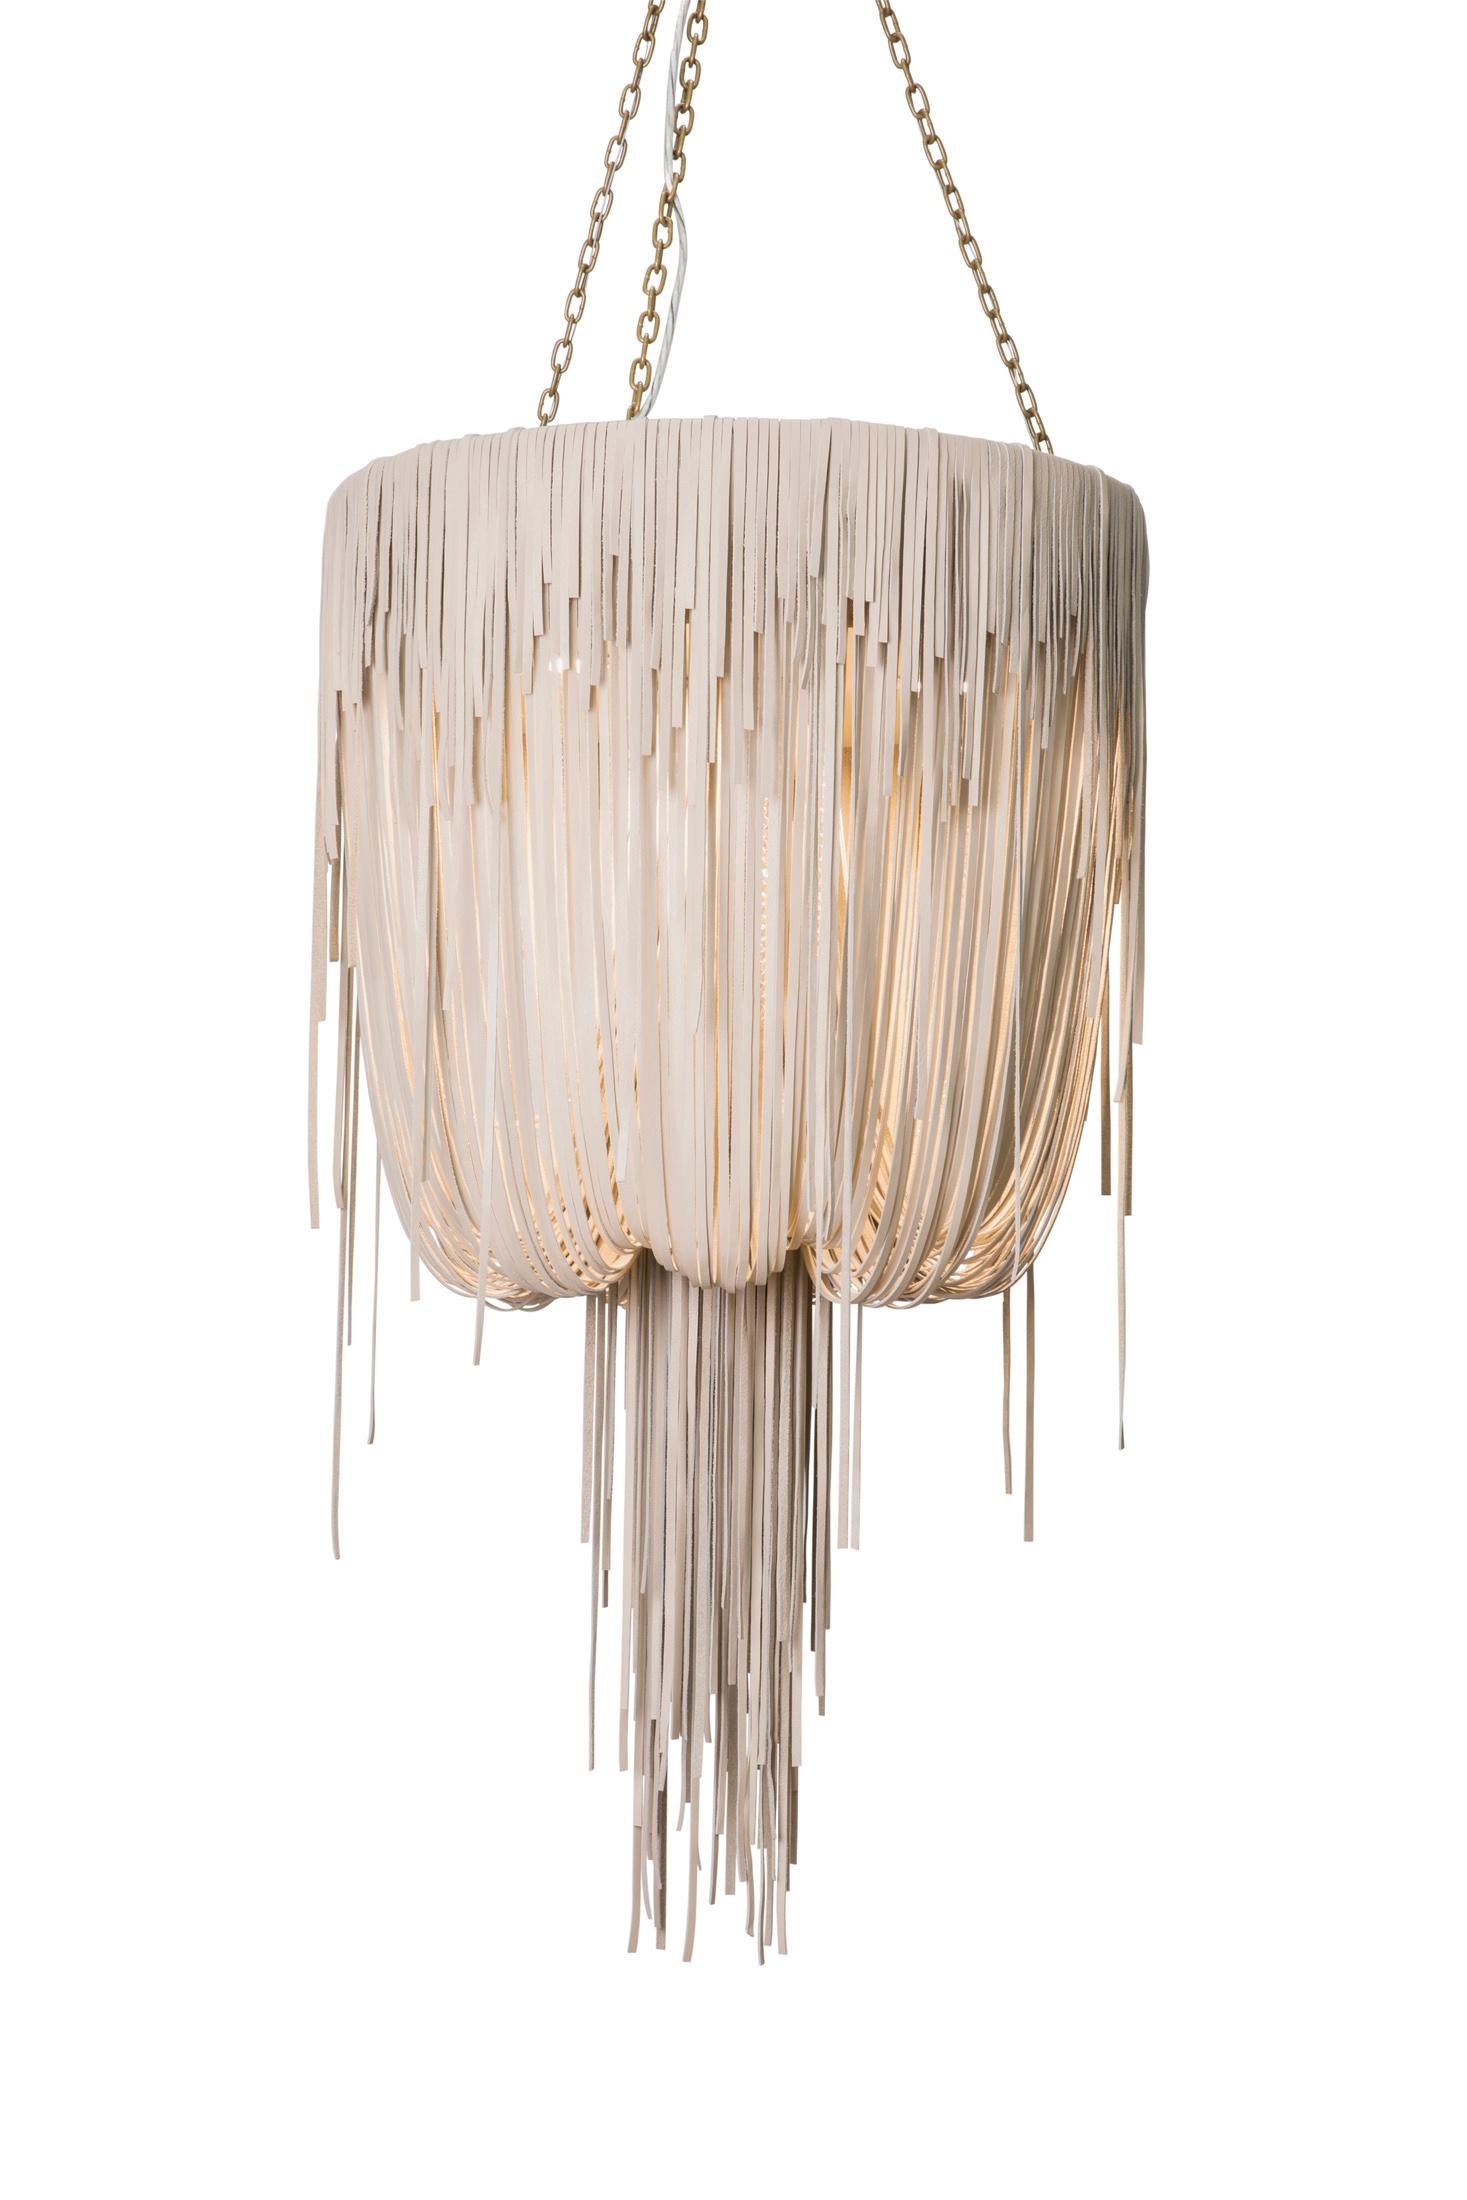 Each chandelier is hand-made with varying lengths of stripped leather, creating layers of movement and texture. The ambient light from within the fixture emerges into the room in a soft glow. All hard-wired lighting is UL-listed for dry locations.